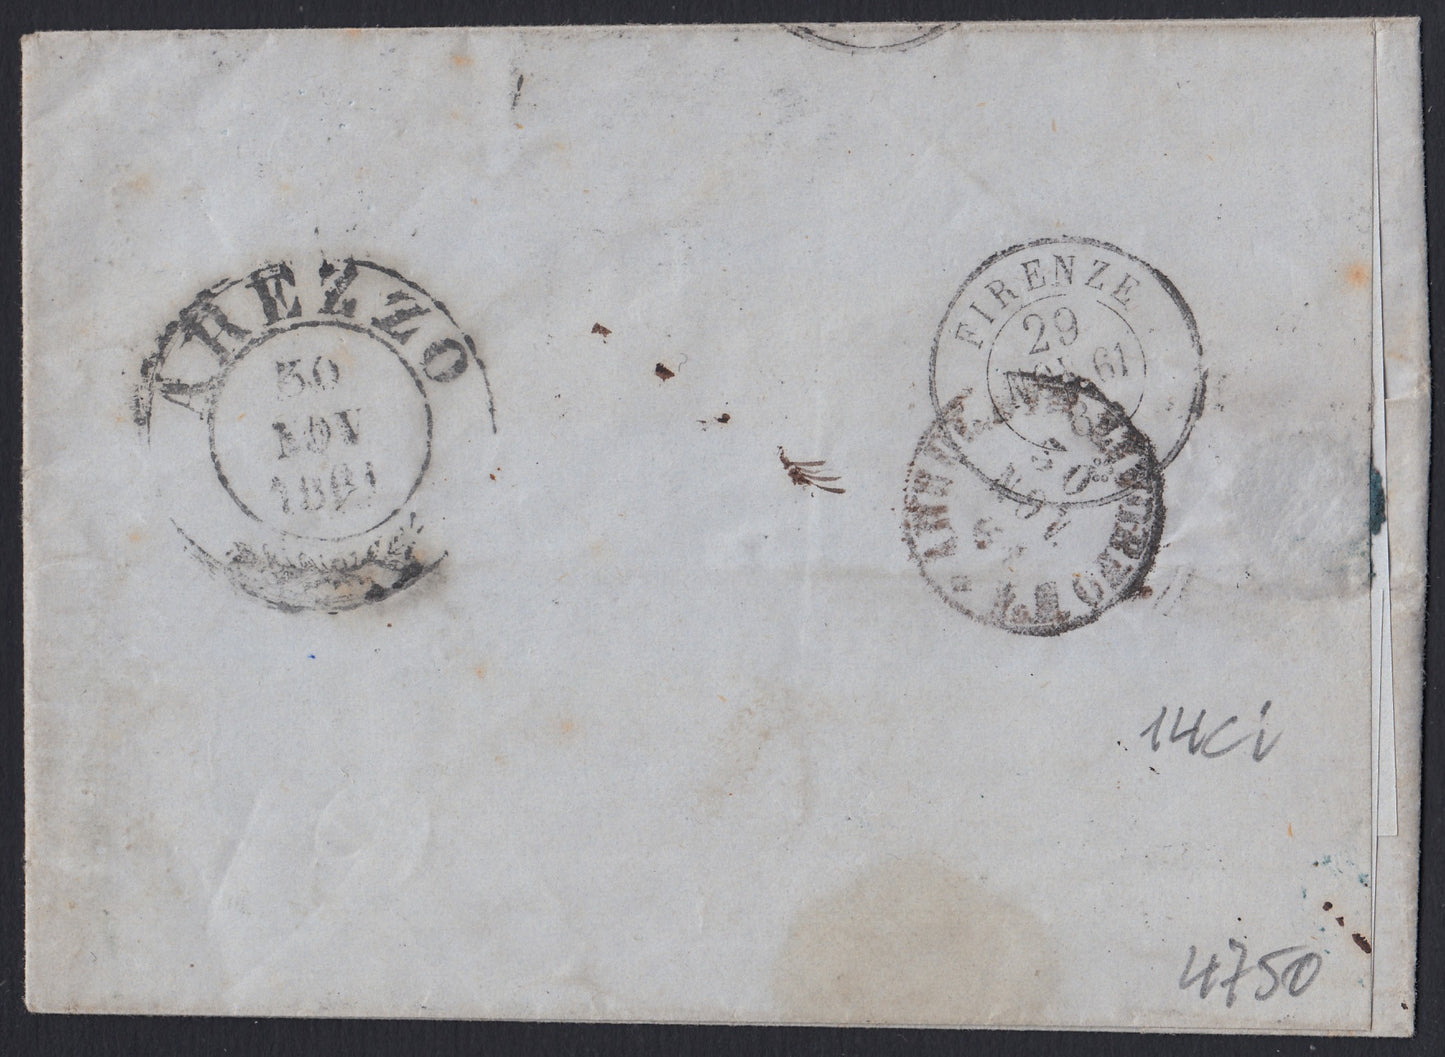 184 - 1861 - Letter sent from Pistoia to Arezzo 29/11/61 franked with c. 10 dark chocolate brown II table. (14Ci).